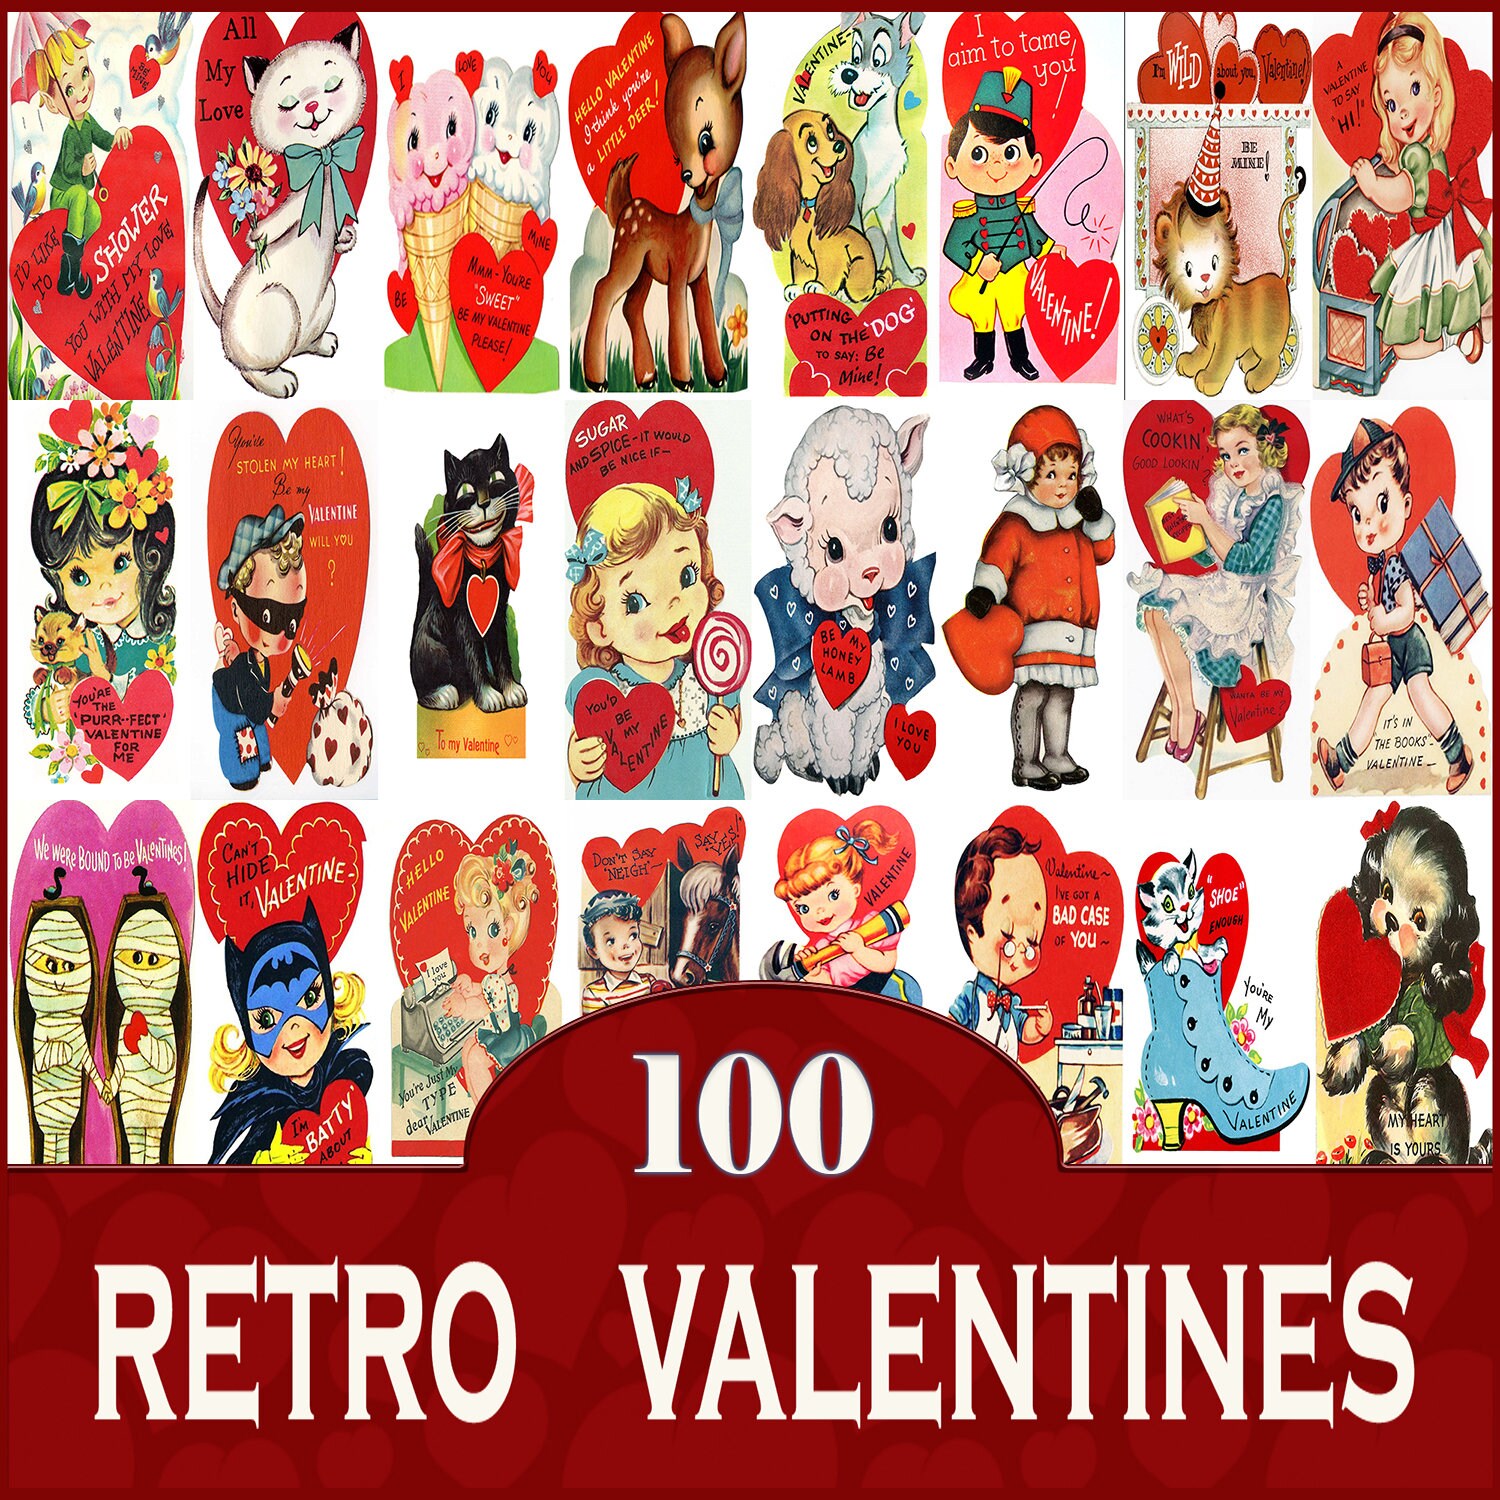 Vintage valentines day card Royalty Free Vector Image